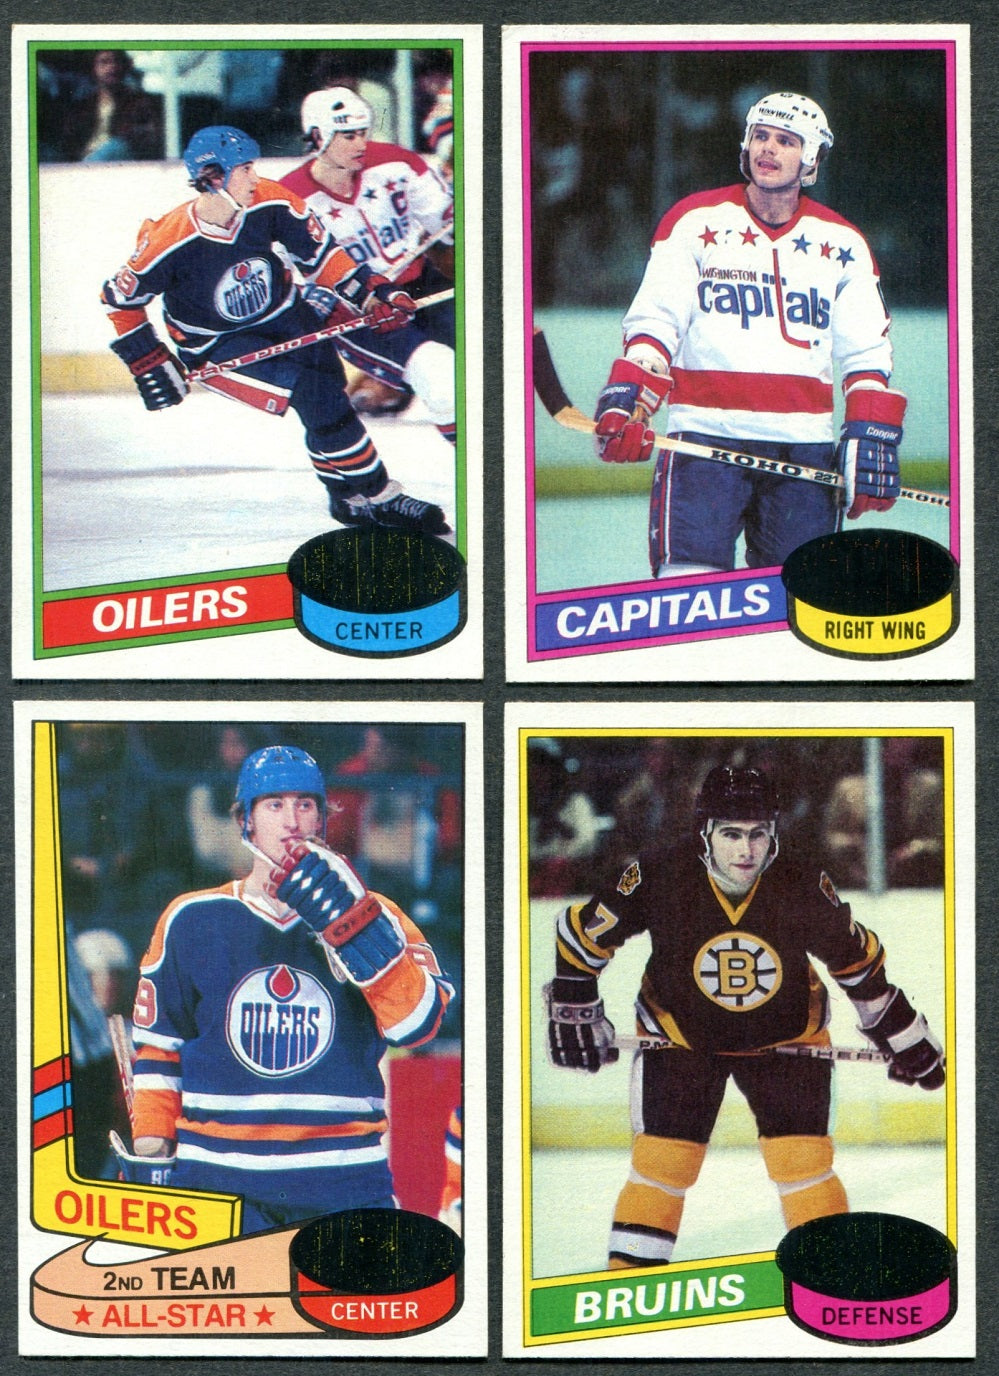 1980/81 Topps Hockey Complete Set EX/MT NM (w/ posters) (264/16) (23-272)